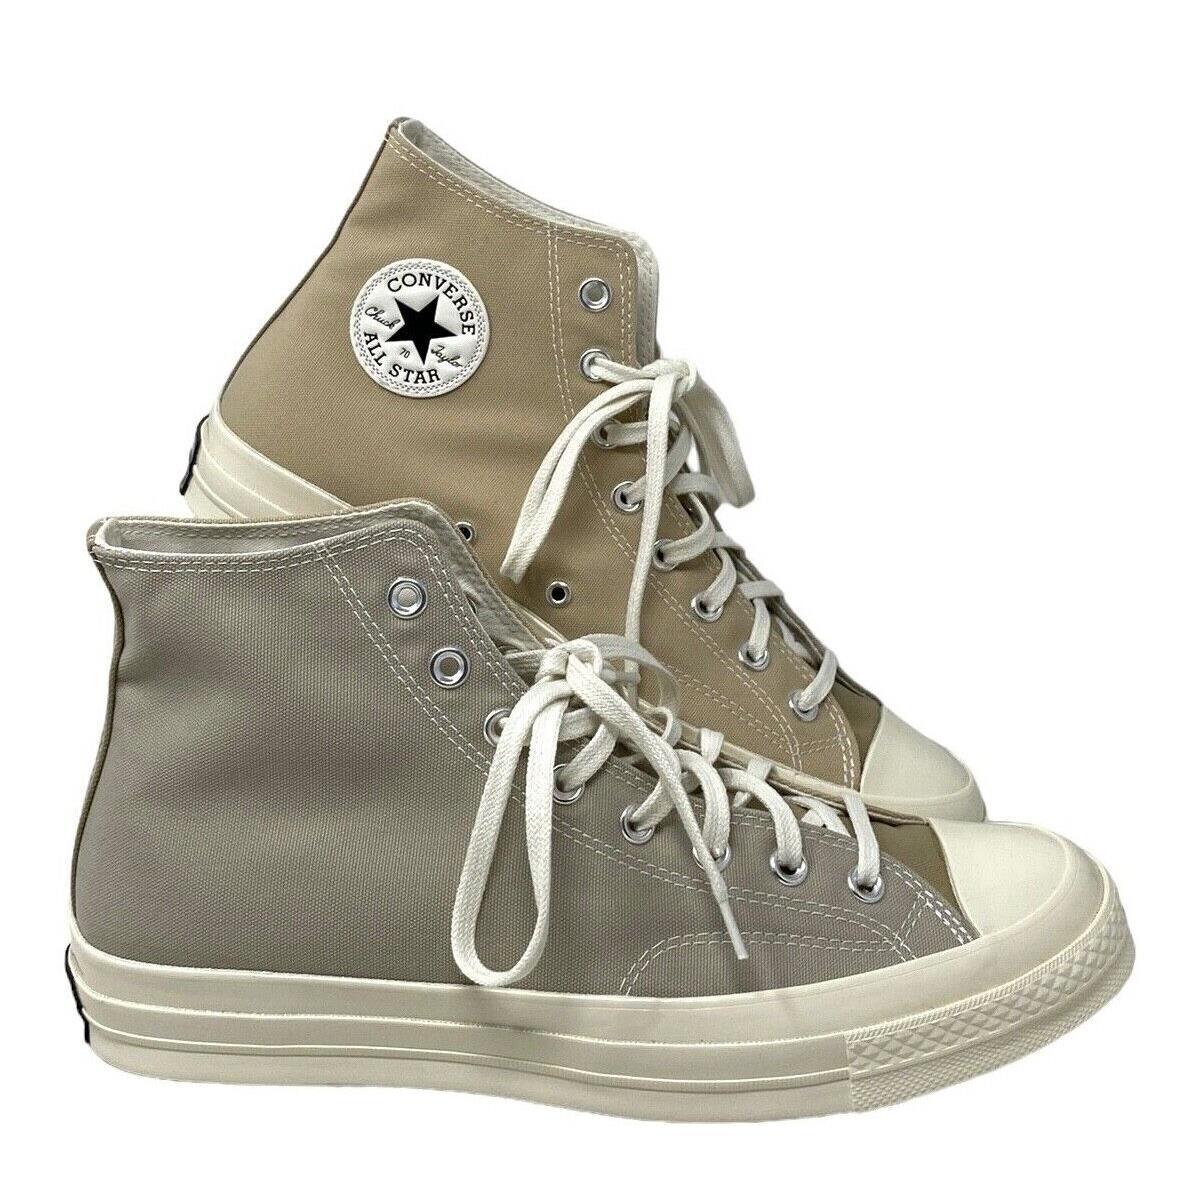 Converse Chuck 70 High Shoes Casual Sneakers Beach Stone Canvas For Men A05658C